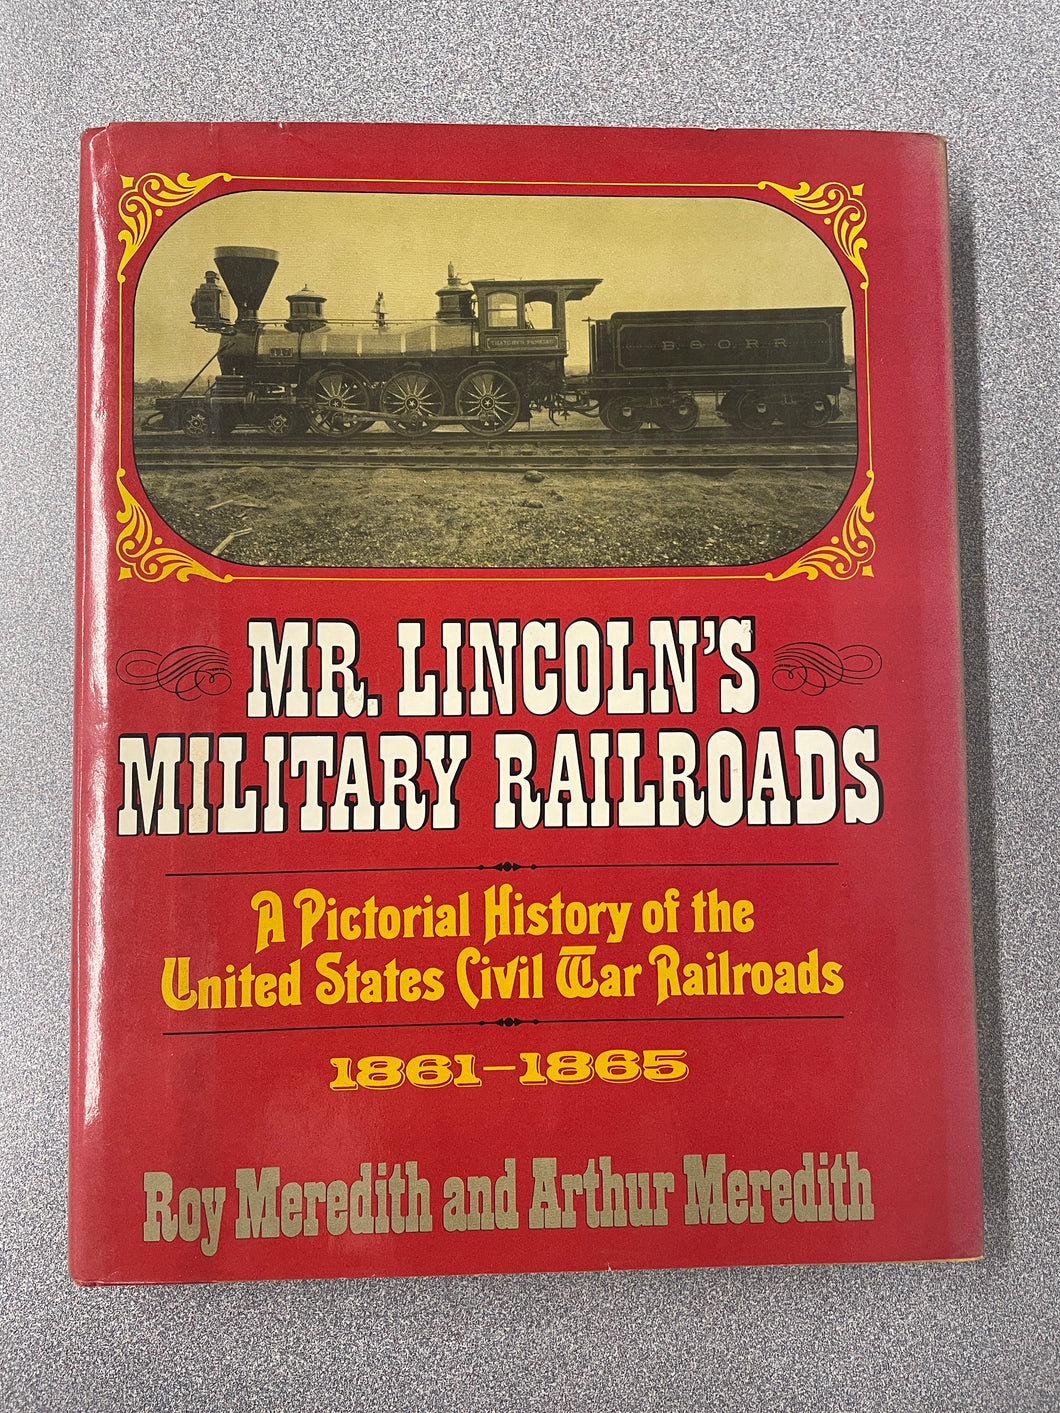 H  Mr. Lincoln's Military Railroads: A Pictorial History of the United States Civil War Railroads, 1861-1865, Meredith, Roy and Arthur Meredith (1979) N 12/23